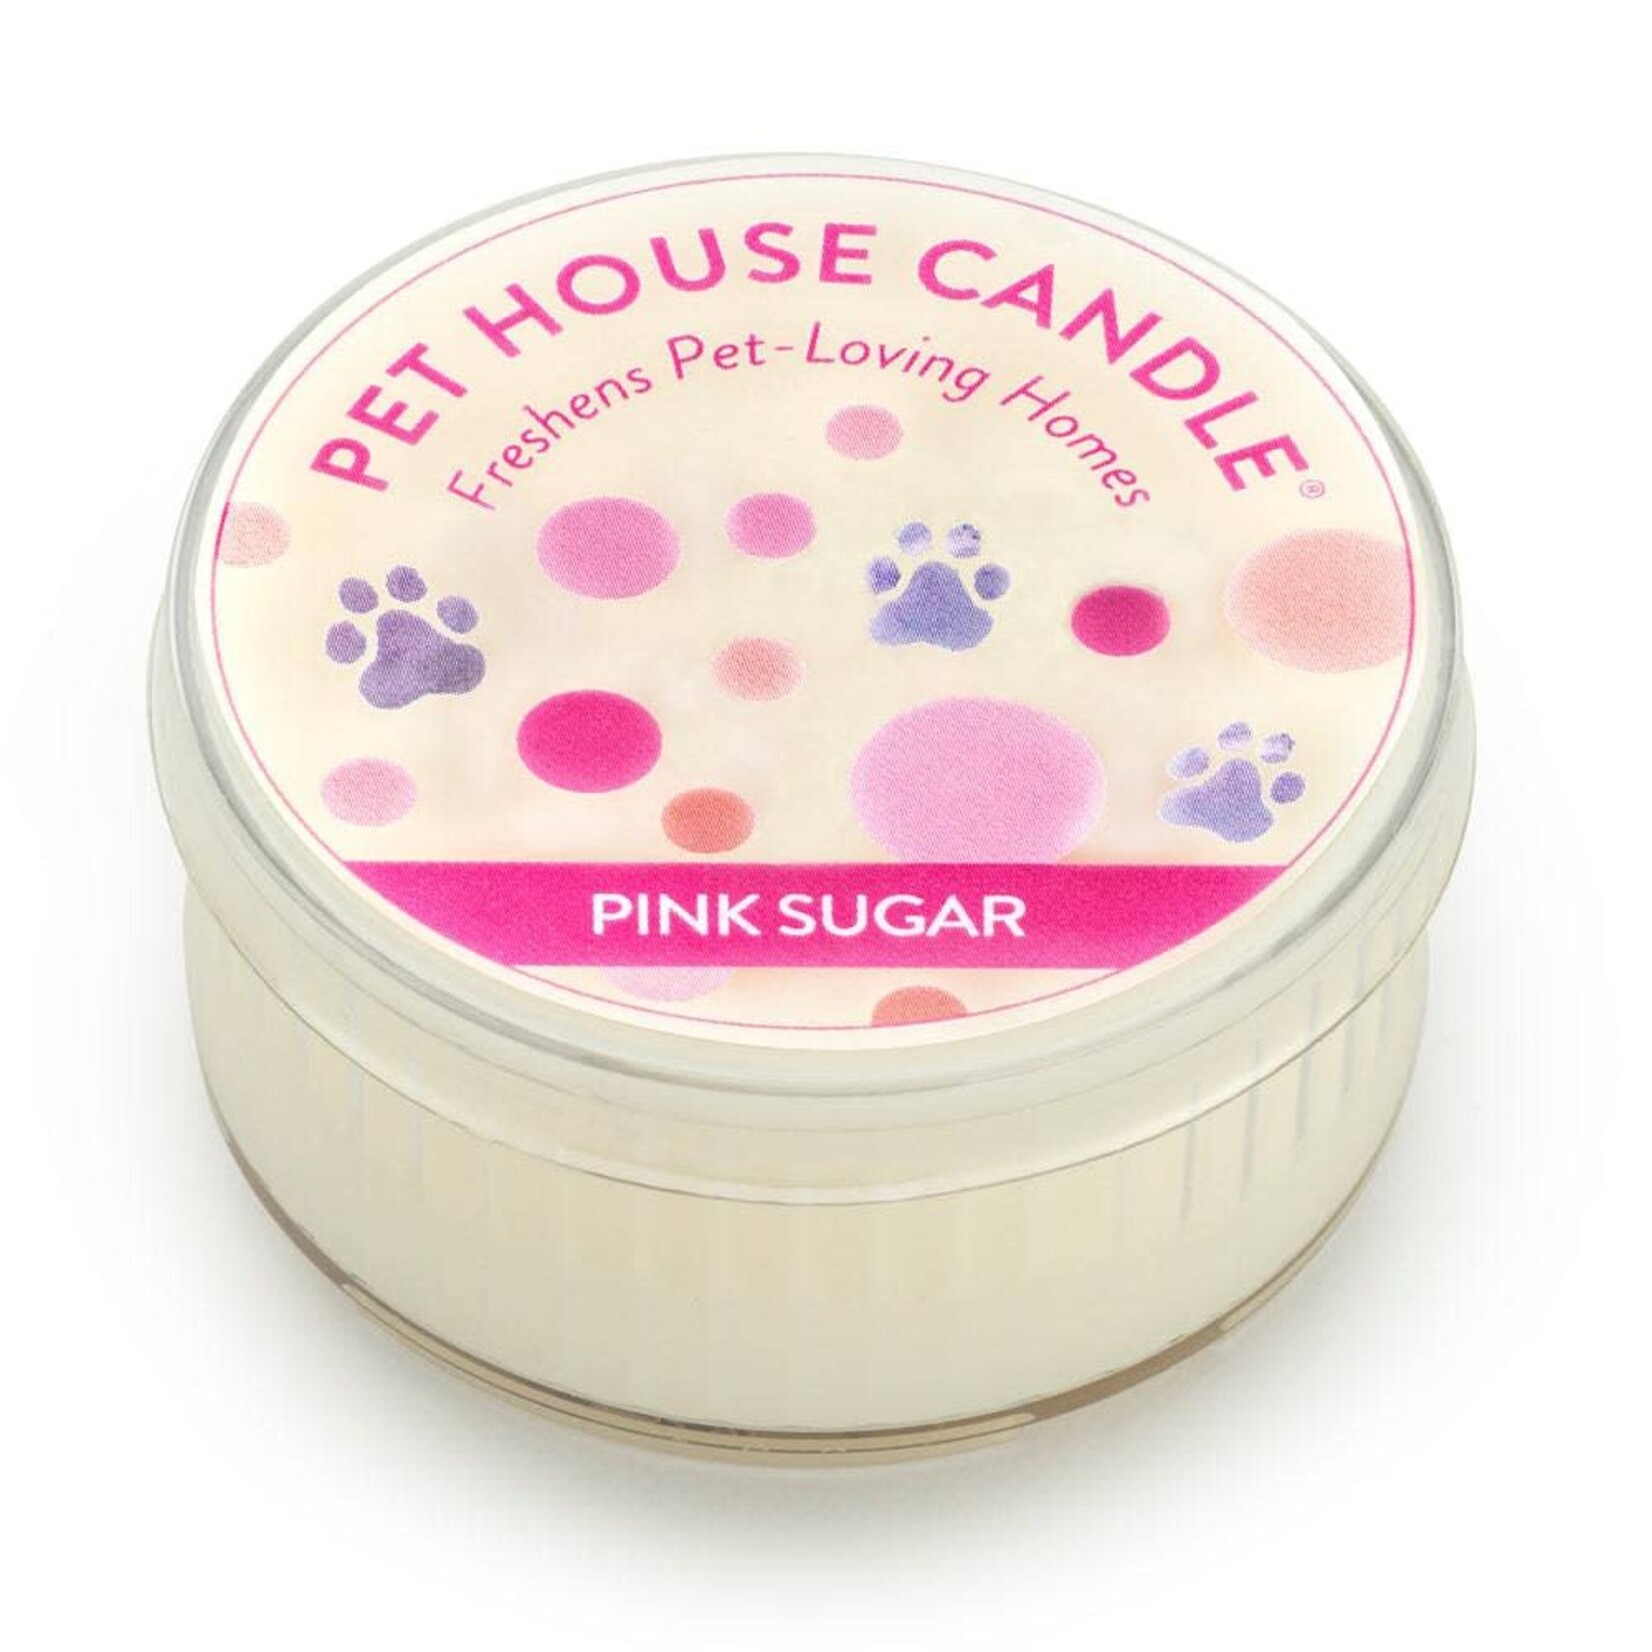 PET HOUSE CANDLE Pet House Mini Candles Pink Sugar